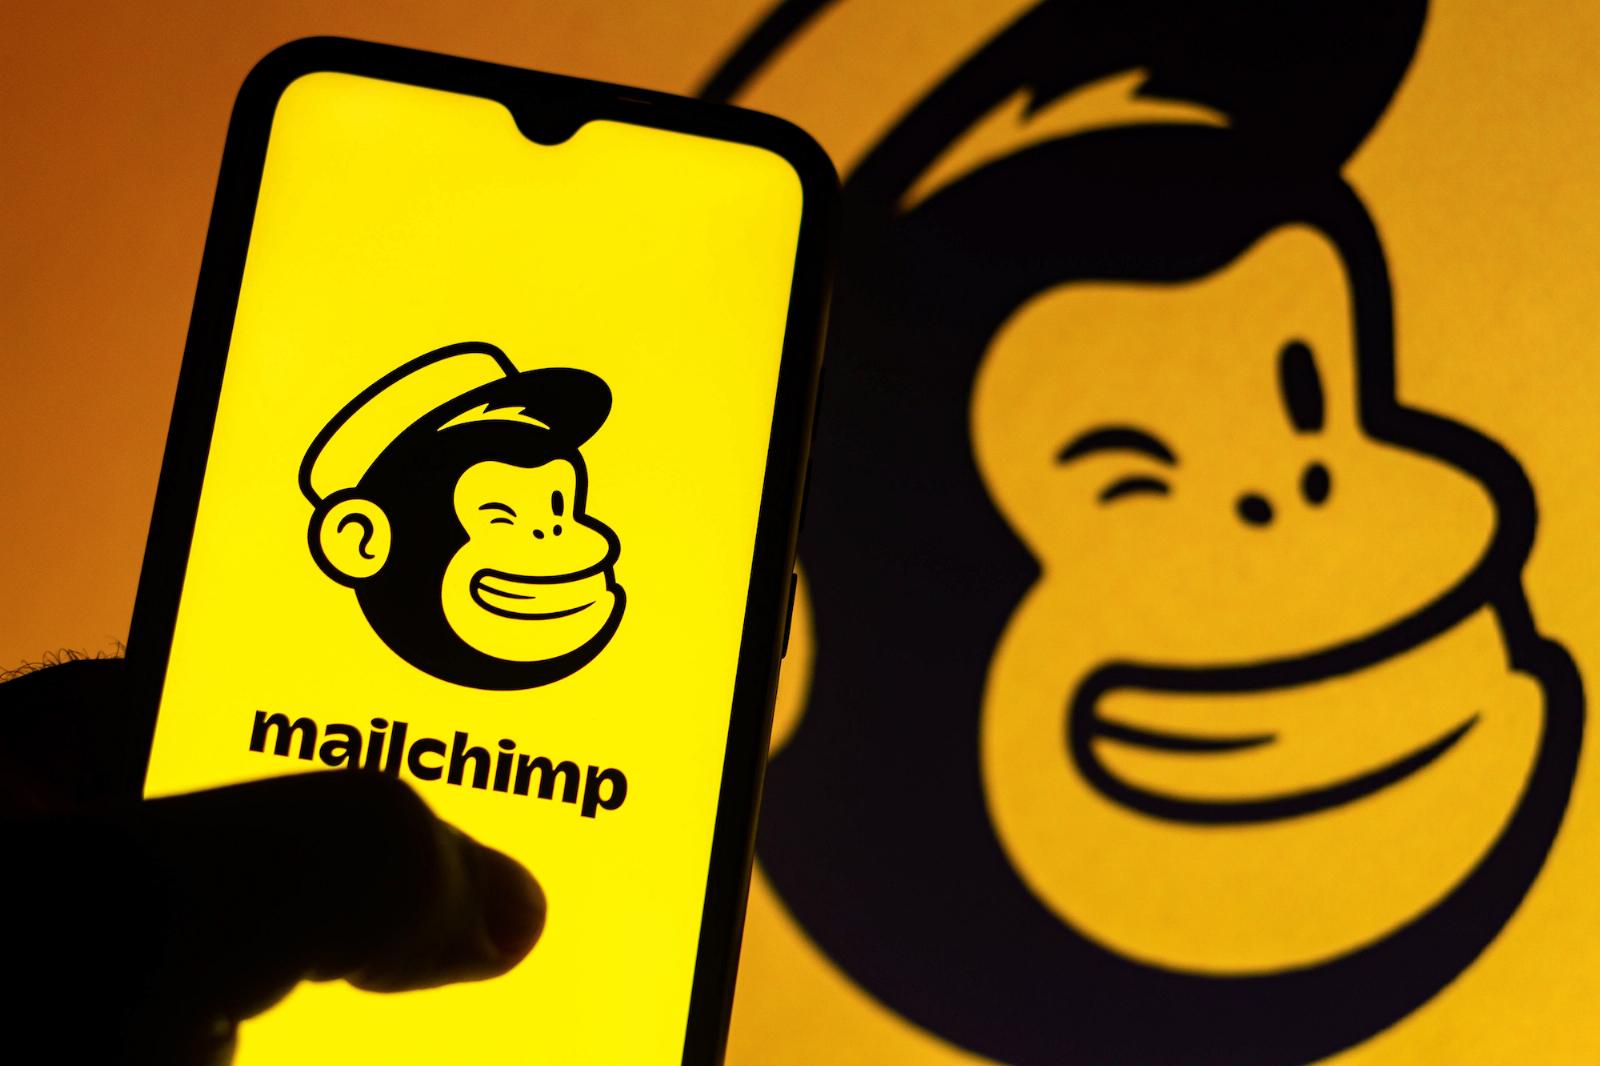 Mailchimp says it was hacked — again